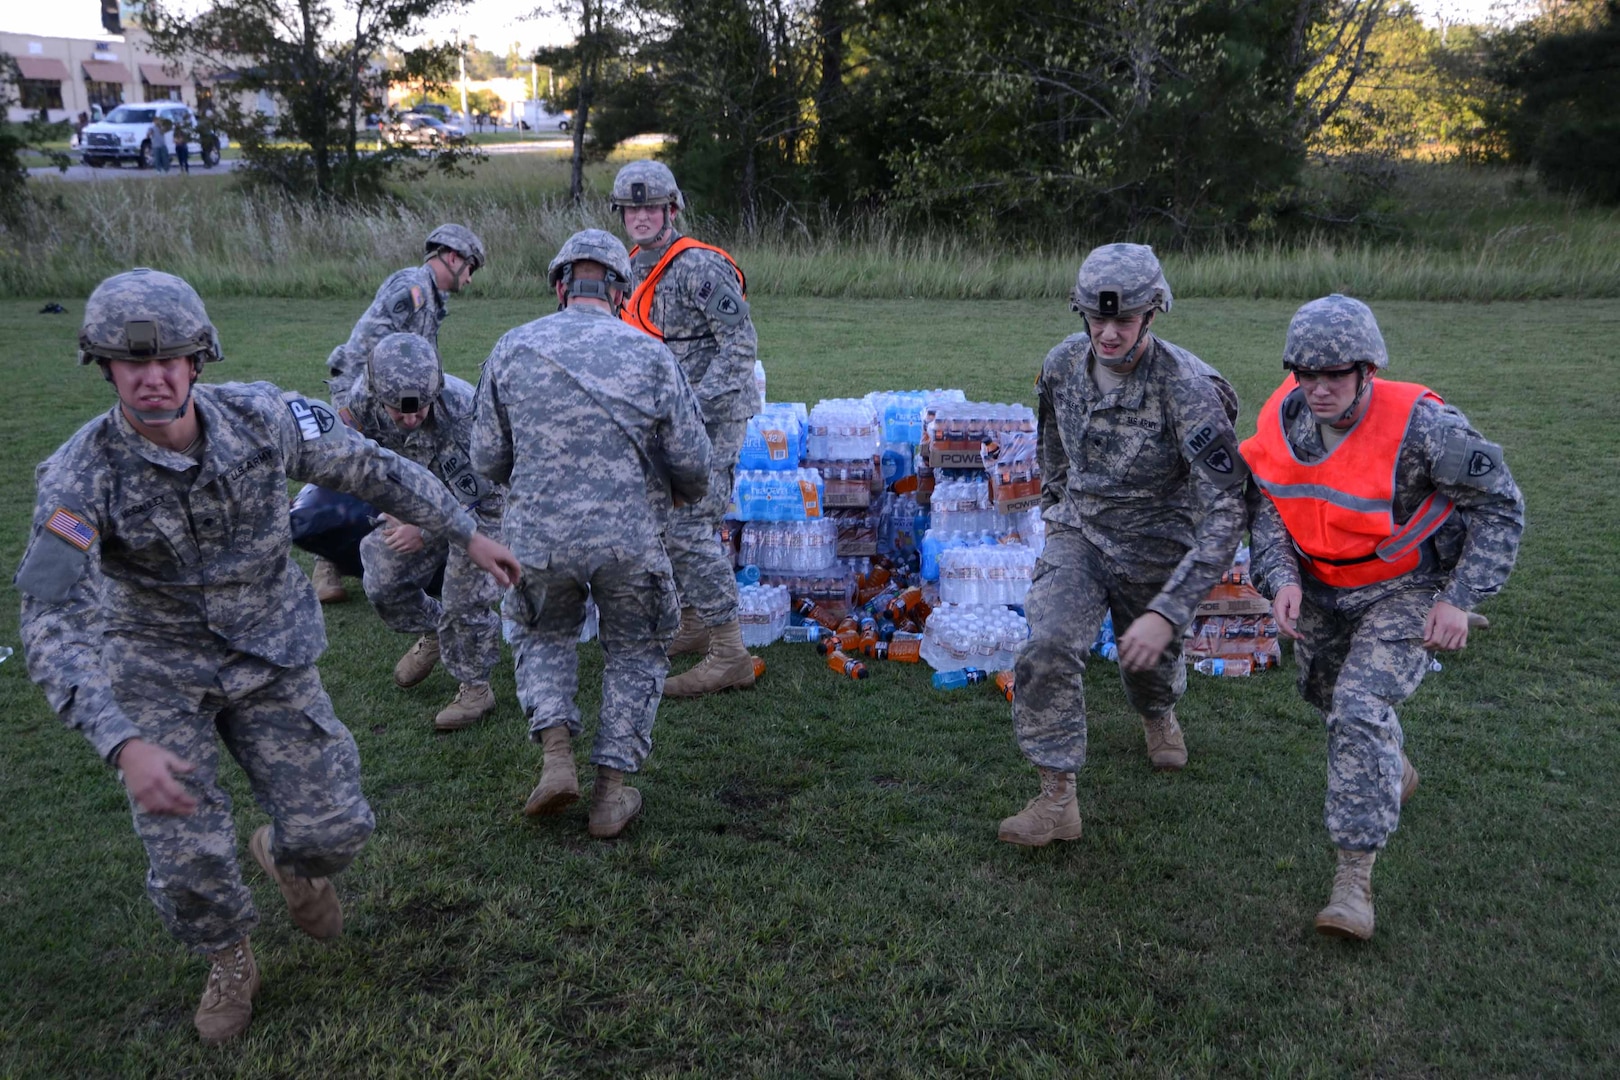 Soldiers from the South Carolina Army National Guard move supplies from a Boeing CH-47 Chinook helicopter in Kingstree, South Carolina during a statewide flood response, Oct. 6. DLA Troop Support's Subsistence supply chain will provide Fort Jackson with water and food at least through the weekend.